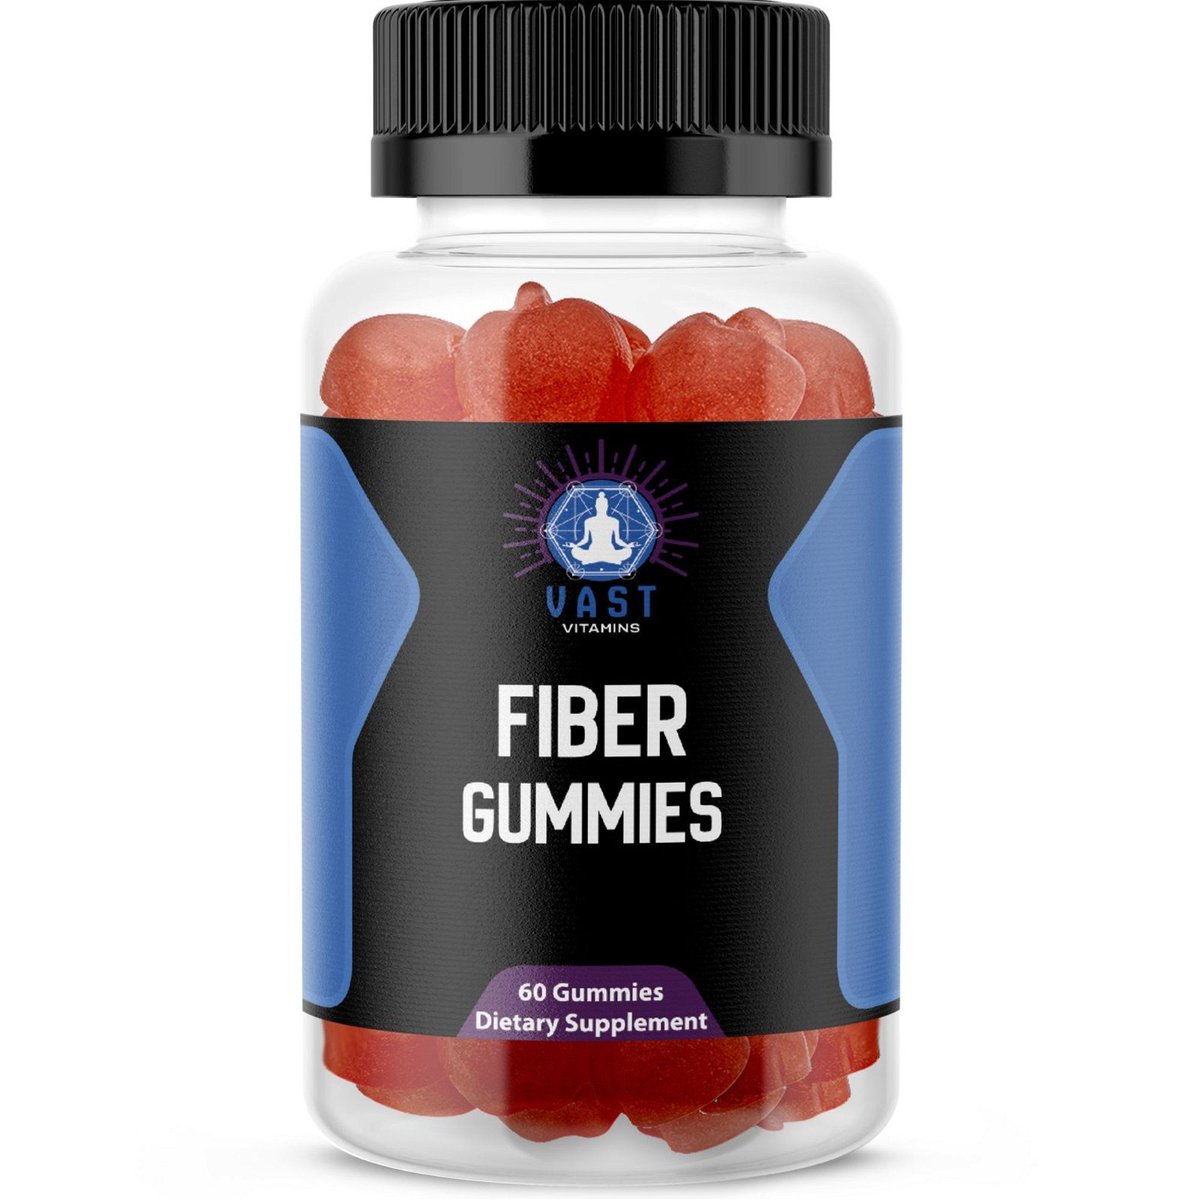 Get your daily fiber intake with Fiber Gummies Healthy Colon Support! 🍃 These delicious gummies are an easy way to get your gut health in check. Grab 'em now for just $24 and feel the difference! #fibergummies